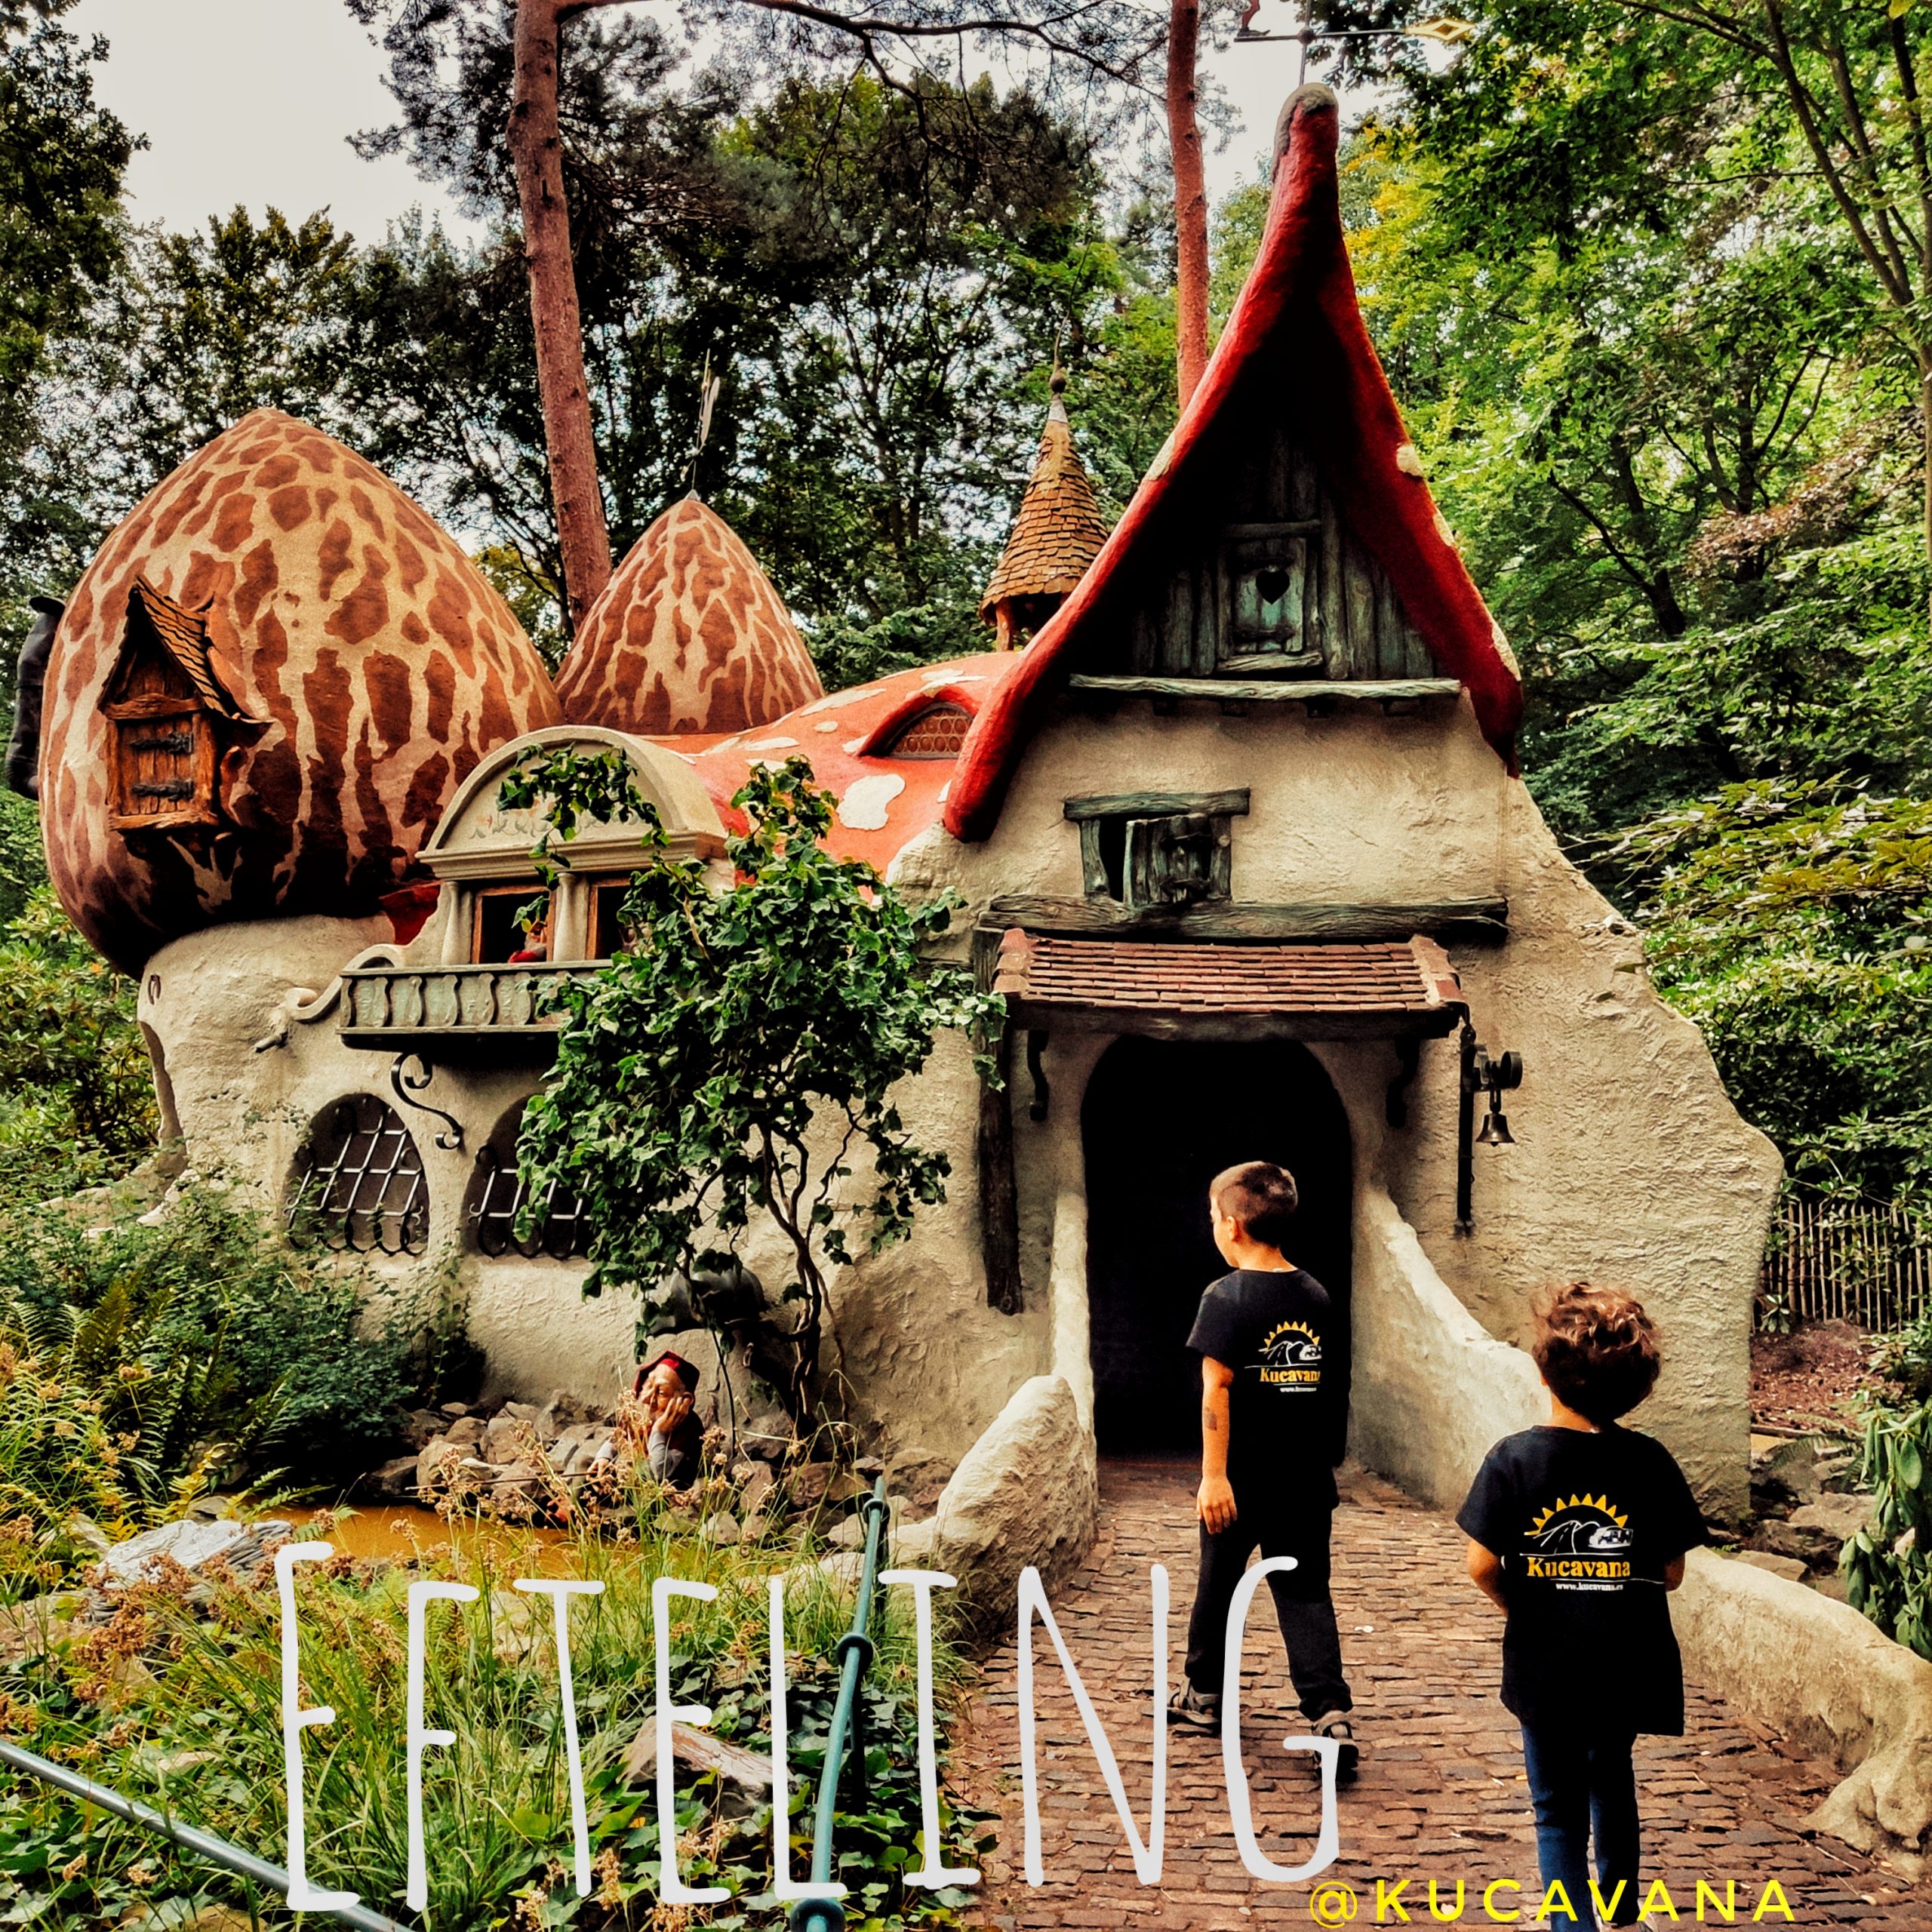 Efteling theme park in Holland - Experience the Fairy tales